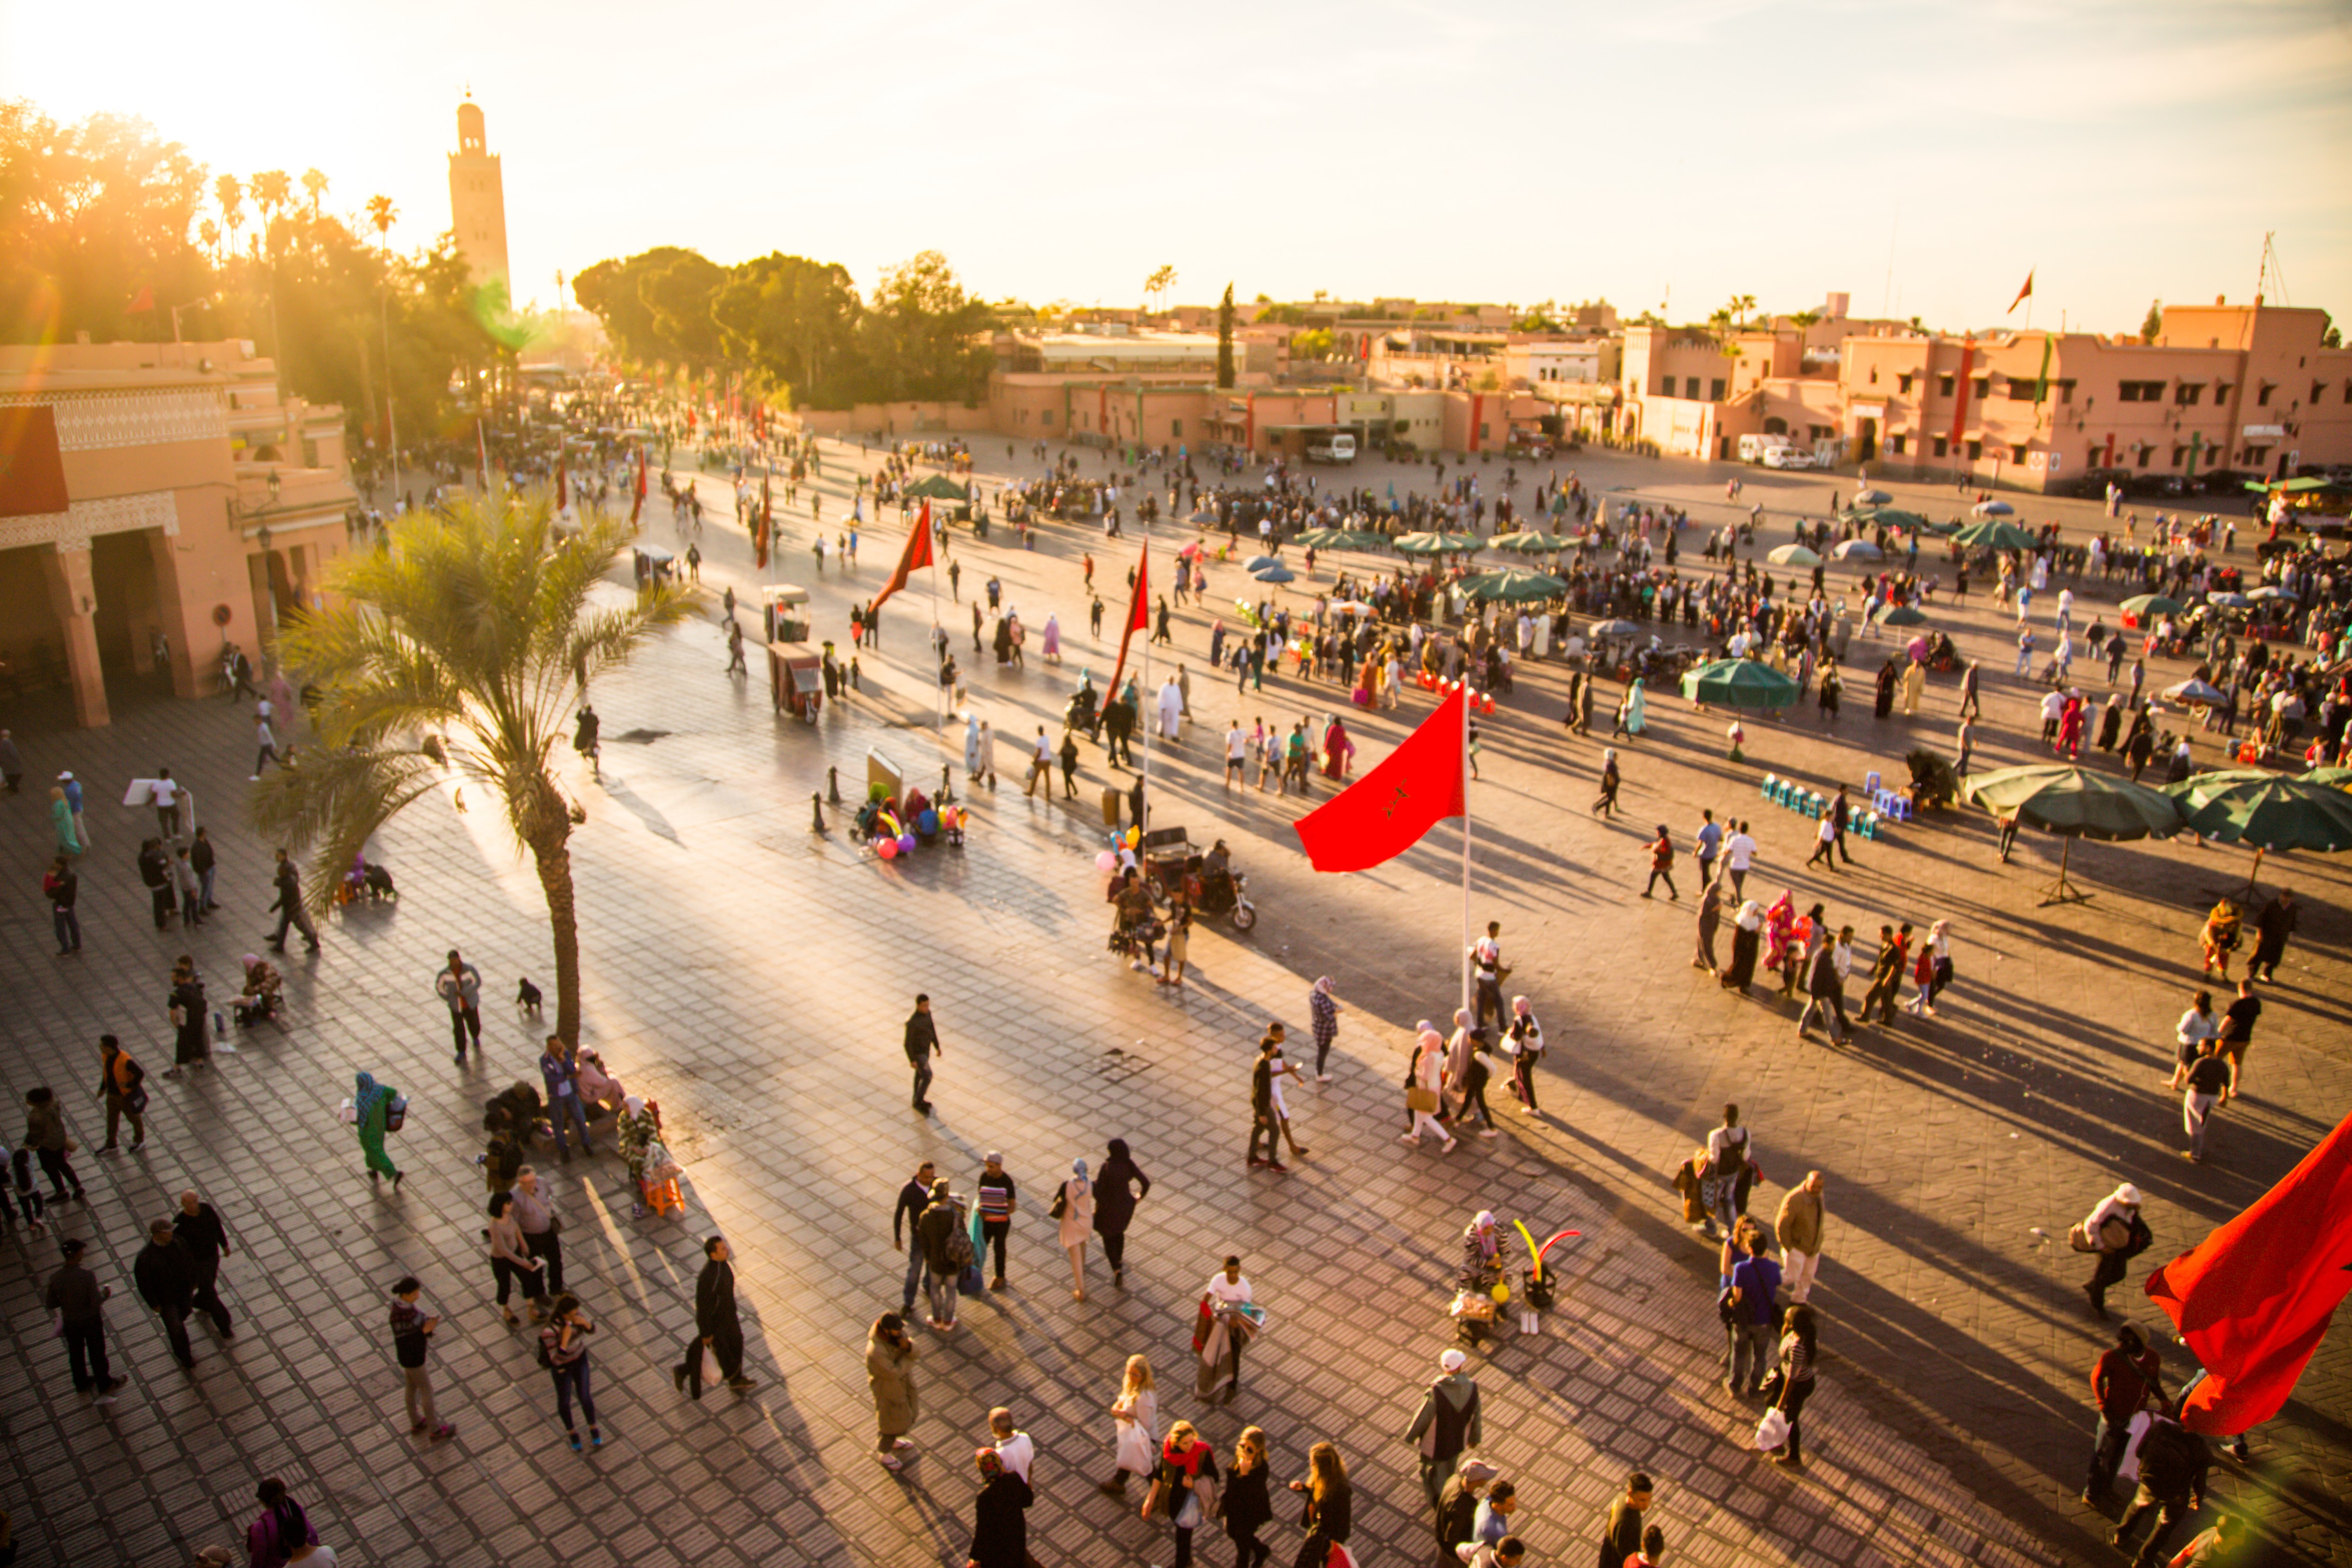 Djemaa el-Fna square, home to snake charmers and street performers